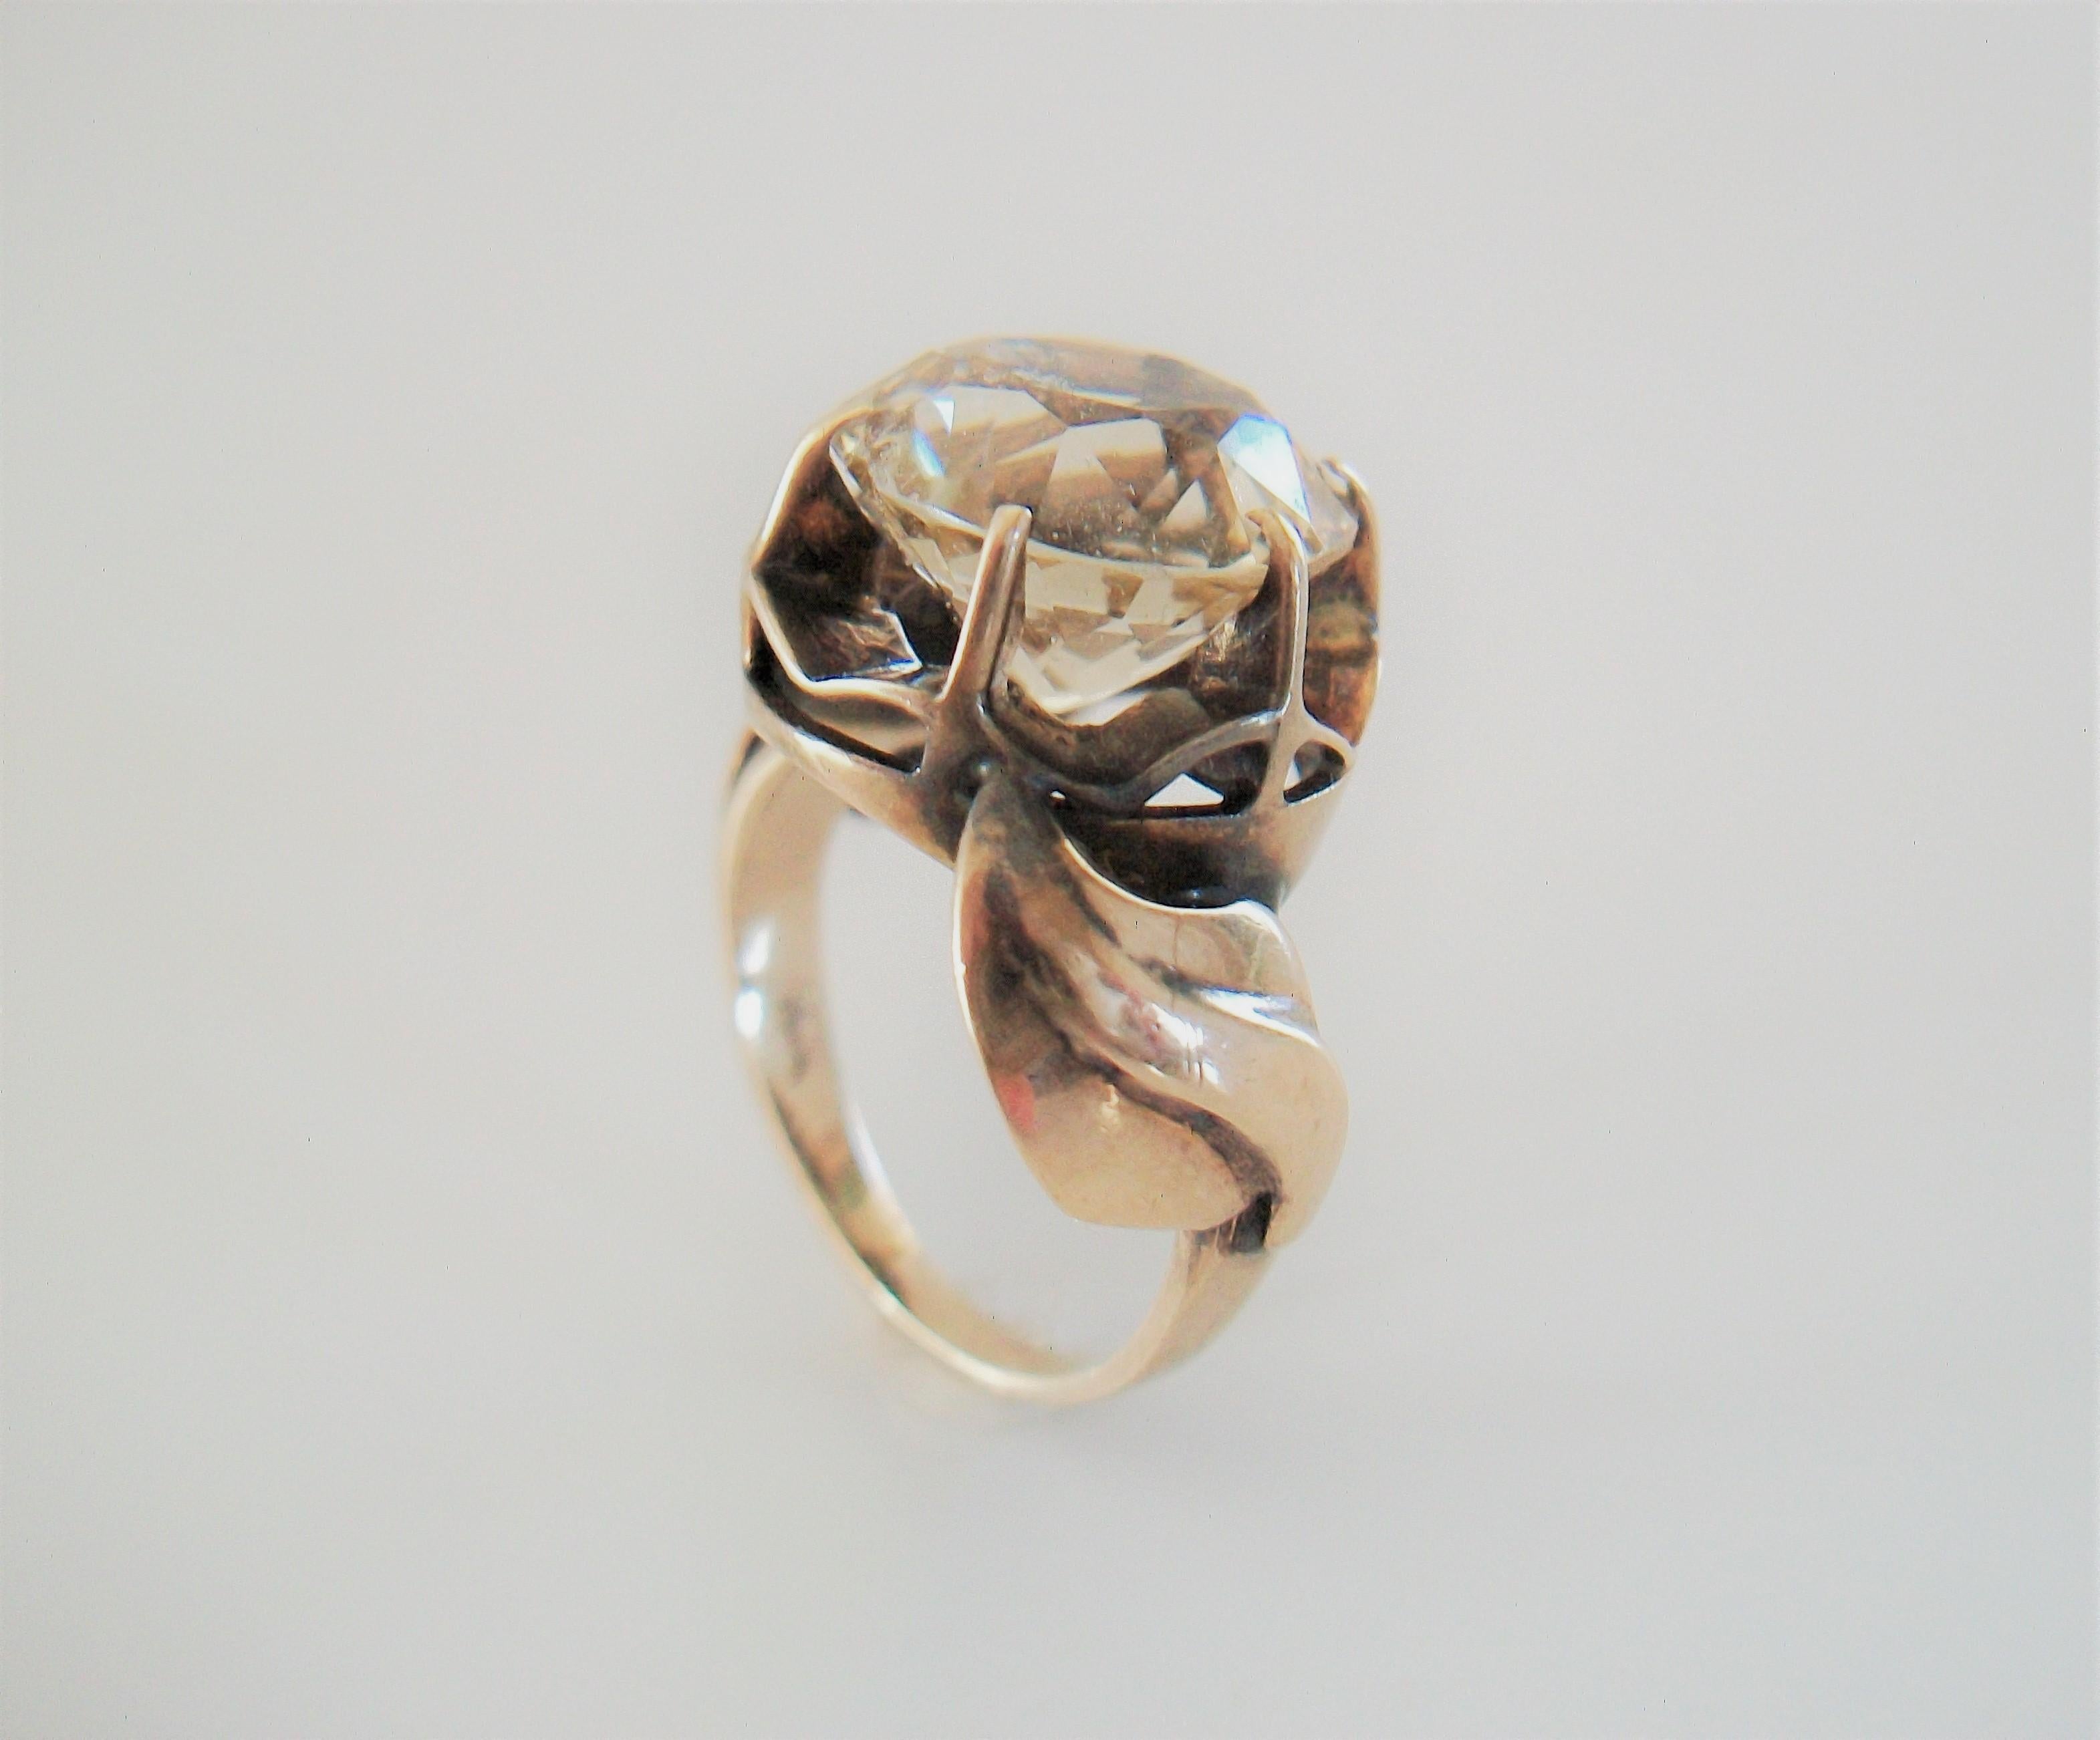 Art Nouveau style 14K yellow gold flower form cocktail ring - prong set with a 6.5 carat (approx. size) pale yellow round faceted Citrine gemstone - custom made - asymmetrical applied gold leaves to each side of the band - unsigned - United States